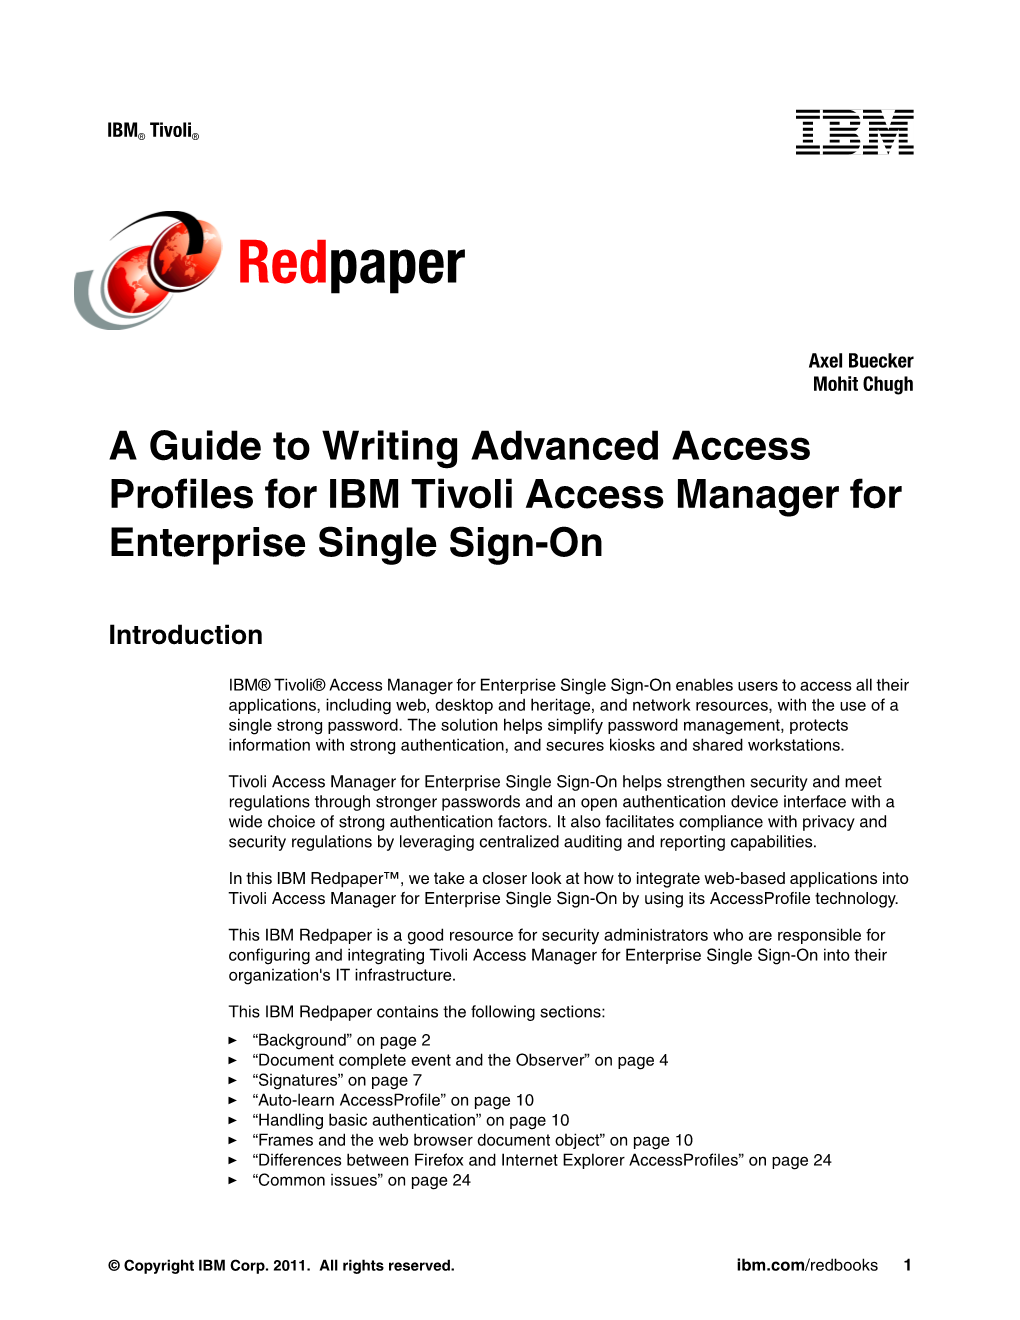 A Guide to Writing Advanced Access Profiles for IBM Tivoli Access Manager for Enterprise Single Sign-On